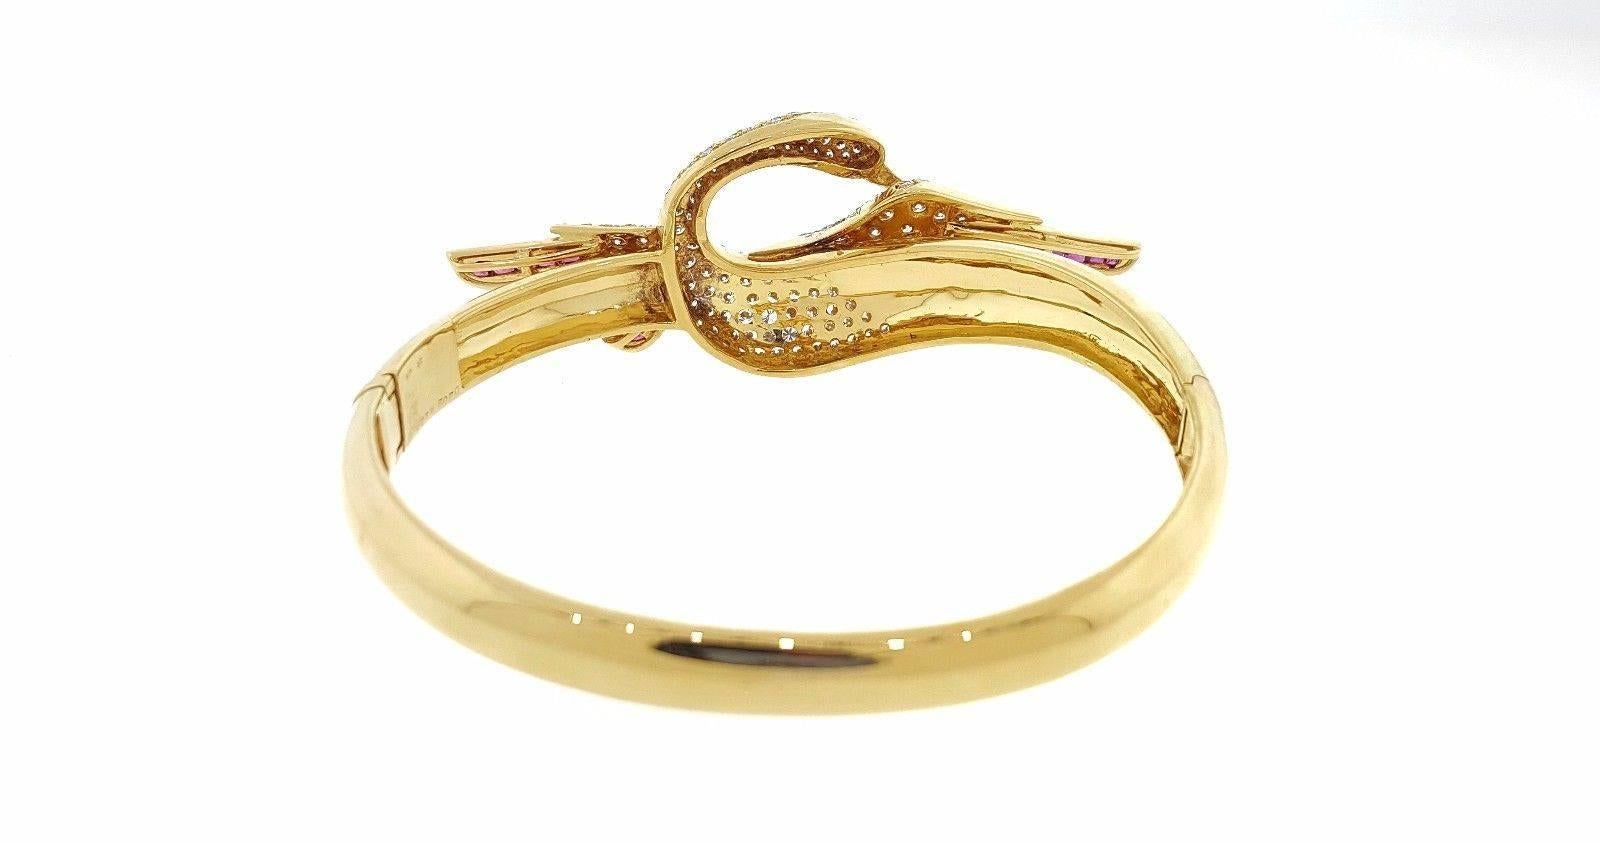 18k Oval Bangle Bracelet with Ruby and Diamond Swan with outstretched wings.The piece has 2.02 carats of Round Brilliant Diamonds, with the pave set in the body of bird. The diamonds are clean and white. The clarity is VS2-SI1 and the color is H-I.